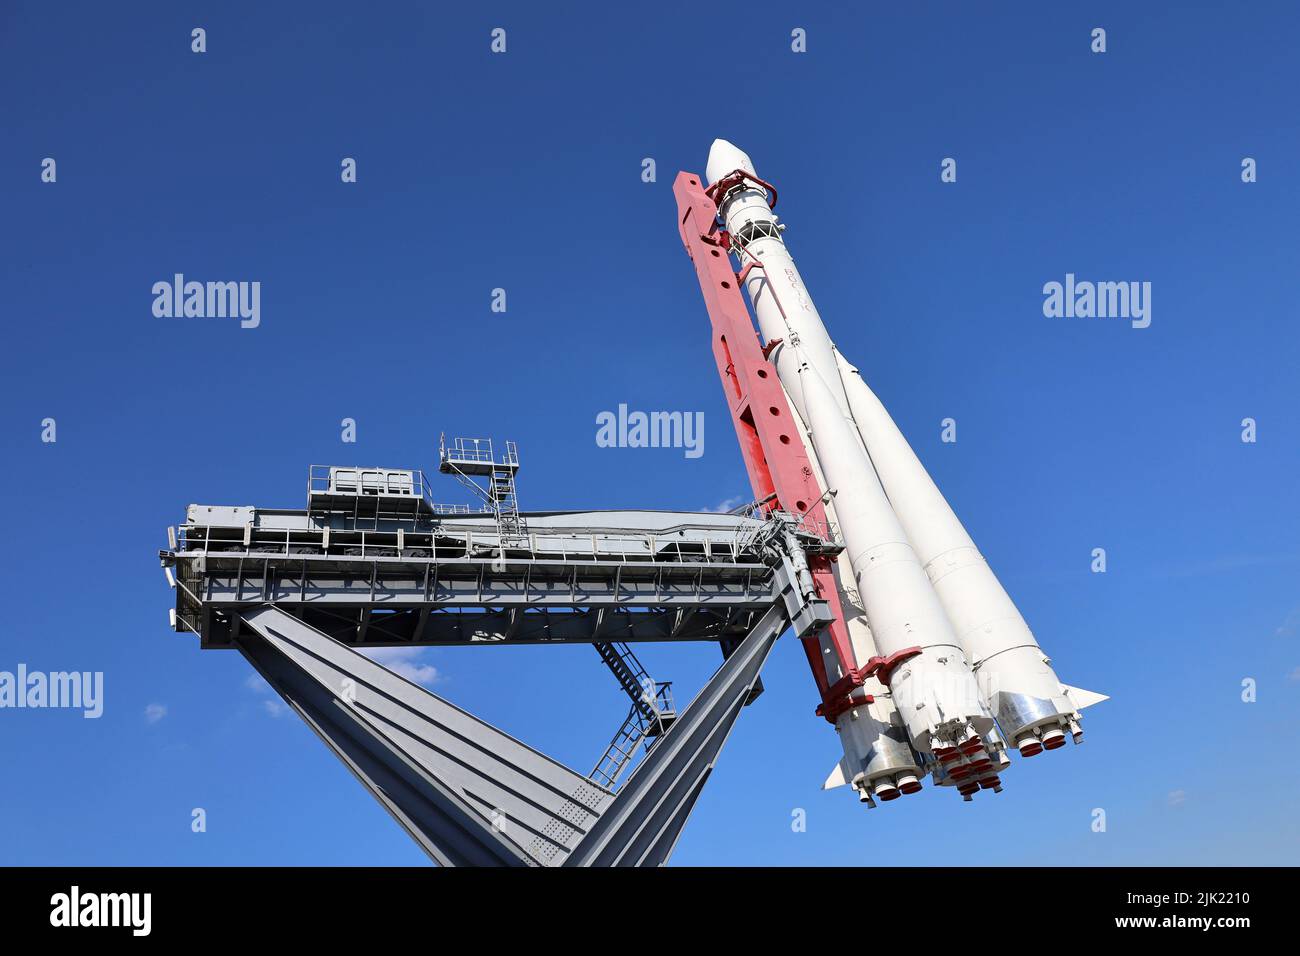 Russian spaceship Vostok 1, monument of the first soviet rocket at VDNH against blue sky. Concept of astronautics in USSR, history of Gagarin's flight Stock Photo